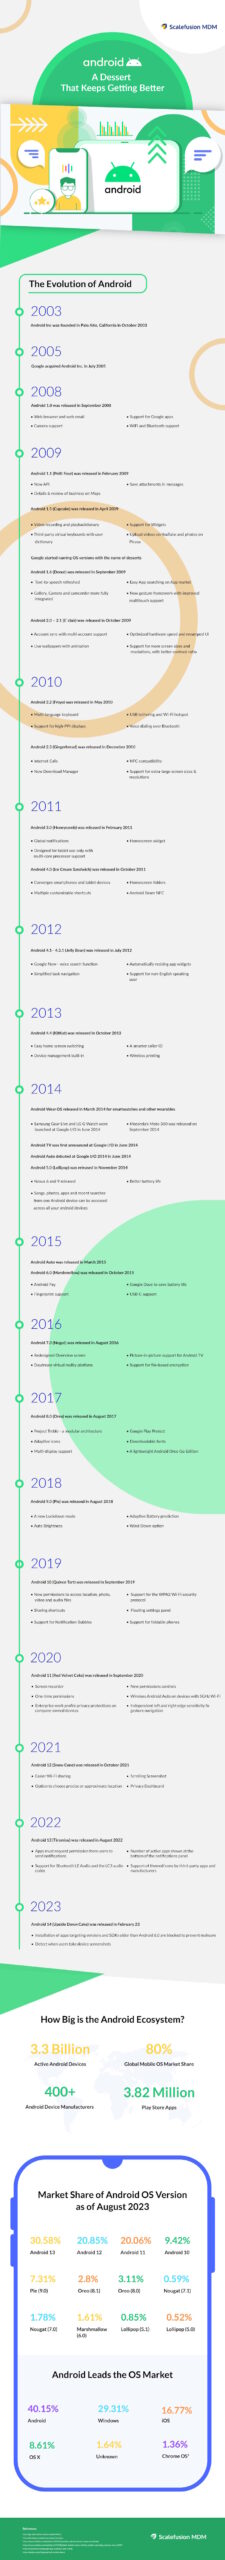 The Evolution of Android